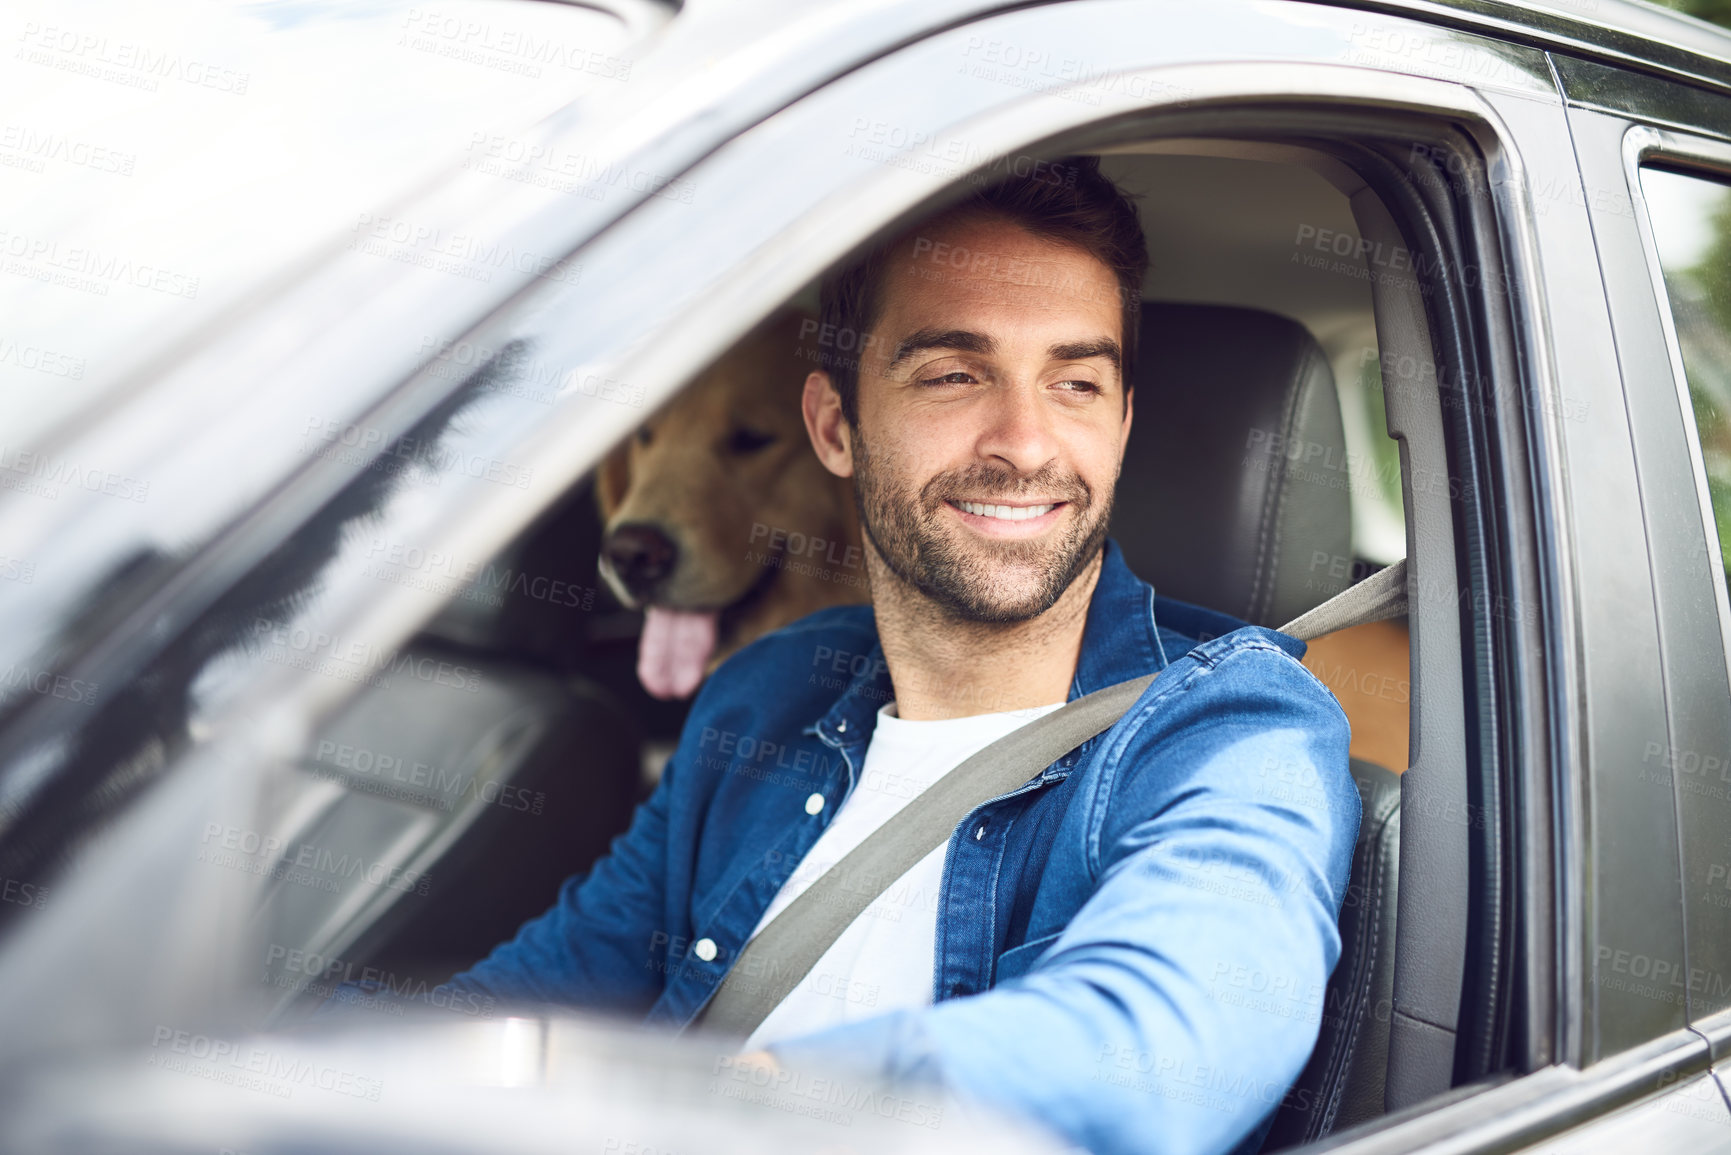 Buy stock photo Cropped shot of a handsome young man taking a drive with his dog in the backseat